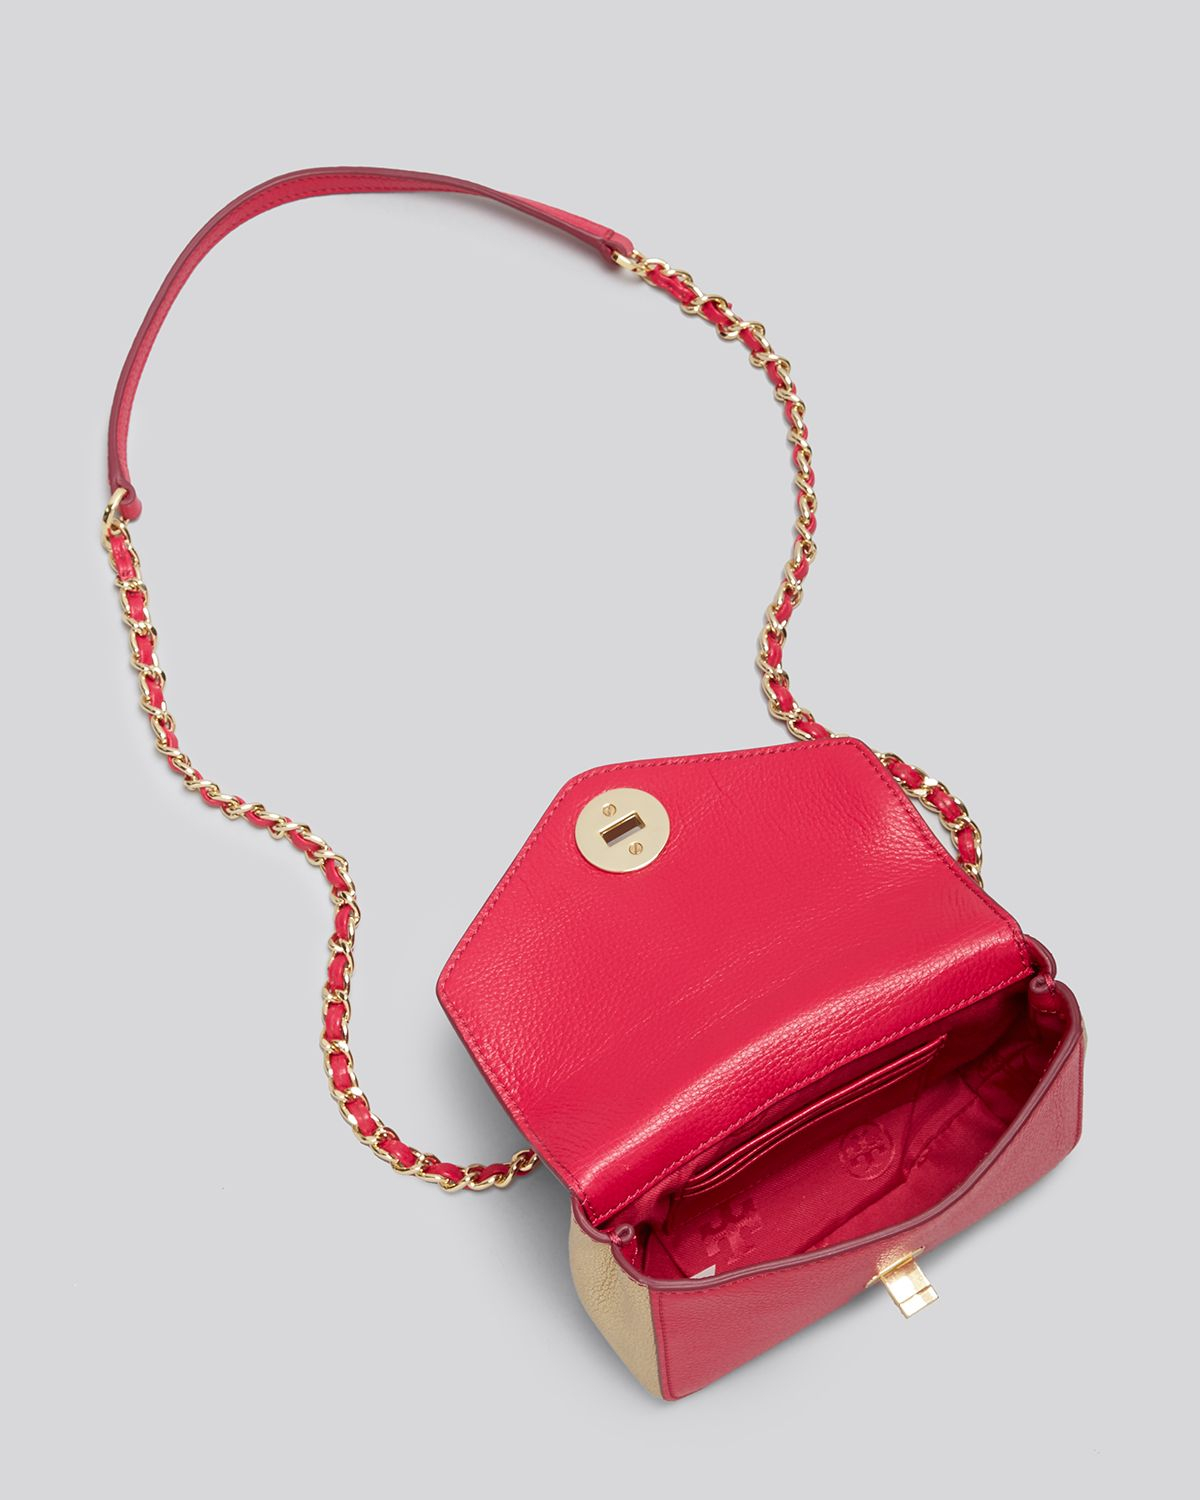 Tory Burch Mini Bag - Kira Chain in Carnation Red/Gold (Red) - Lyst